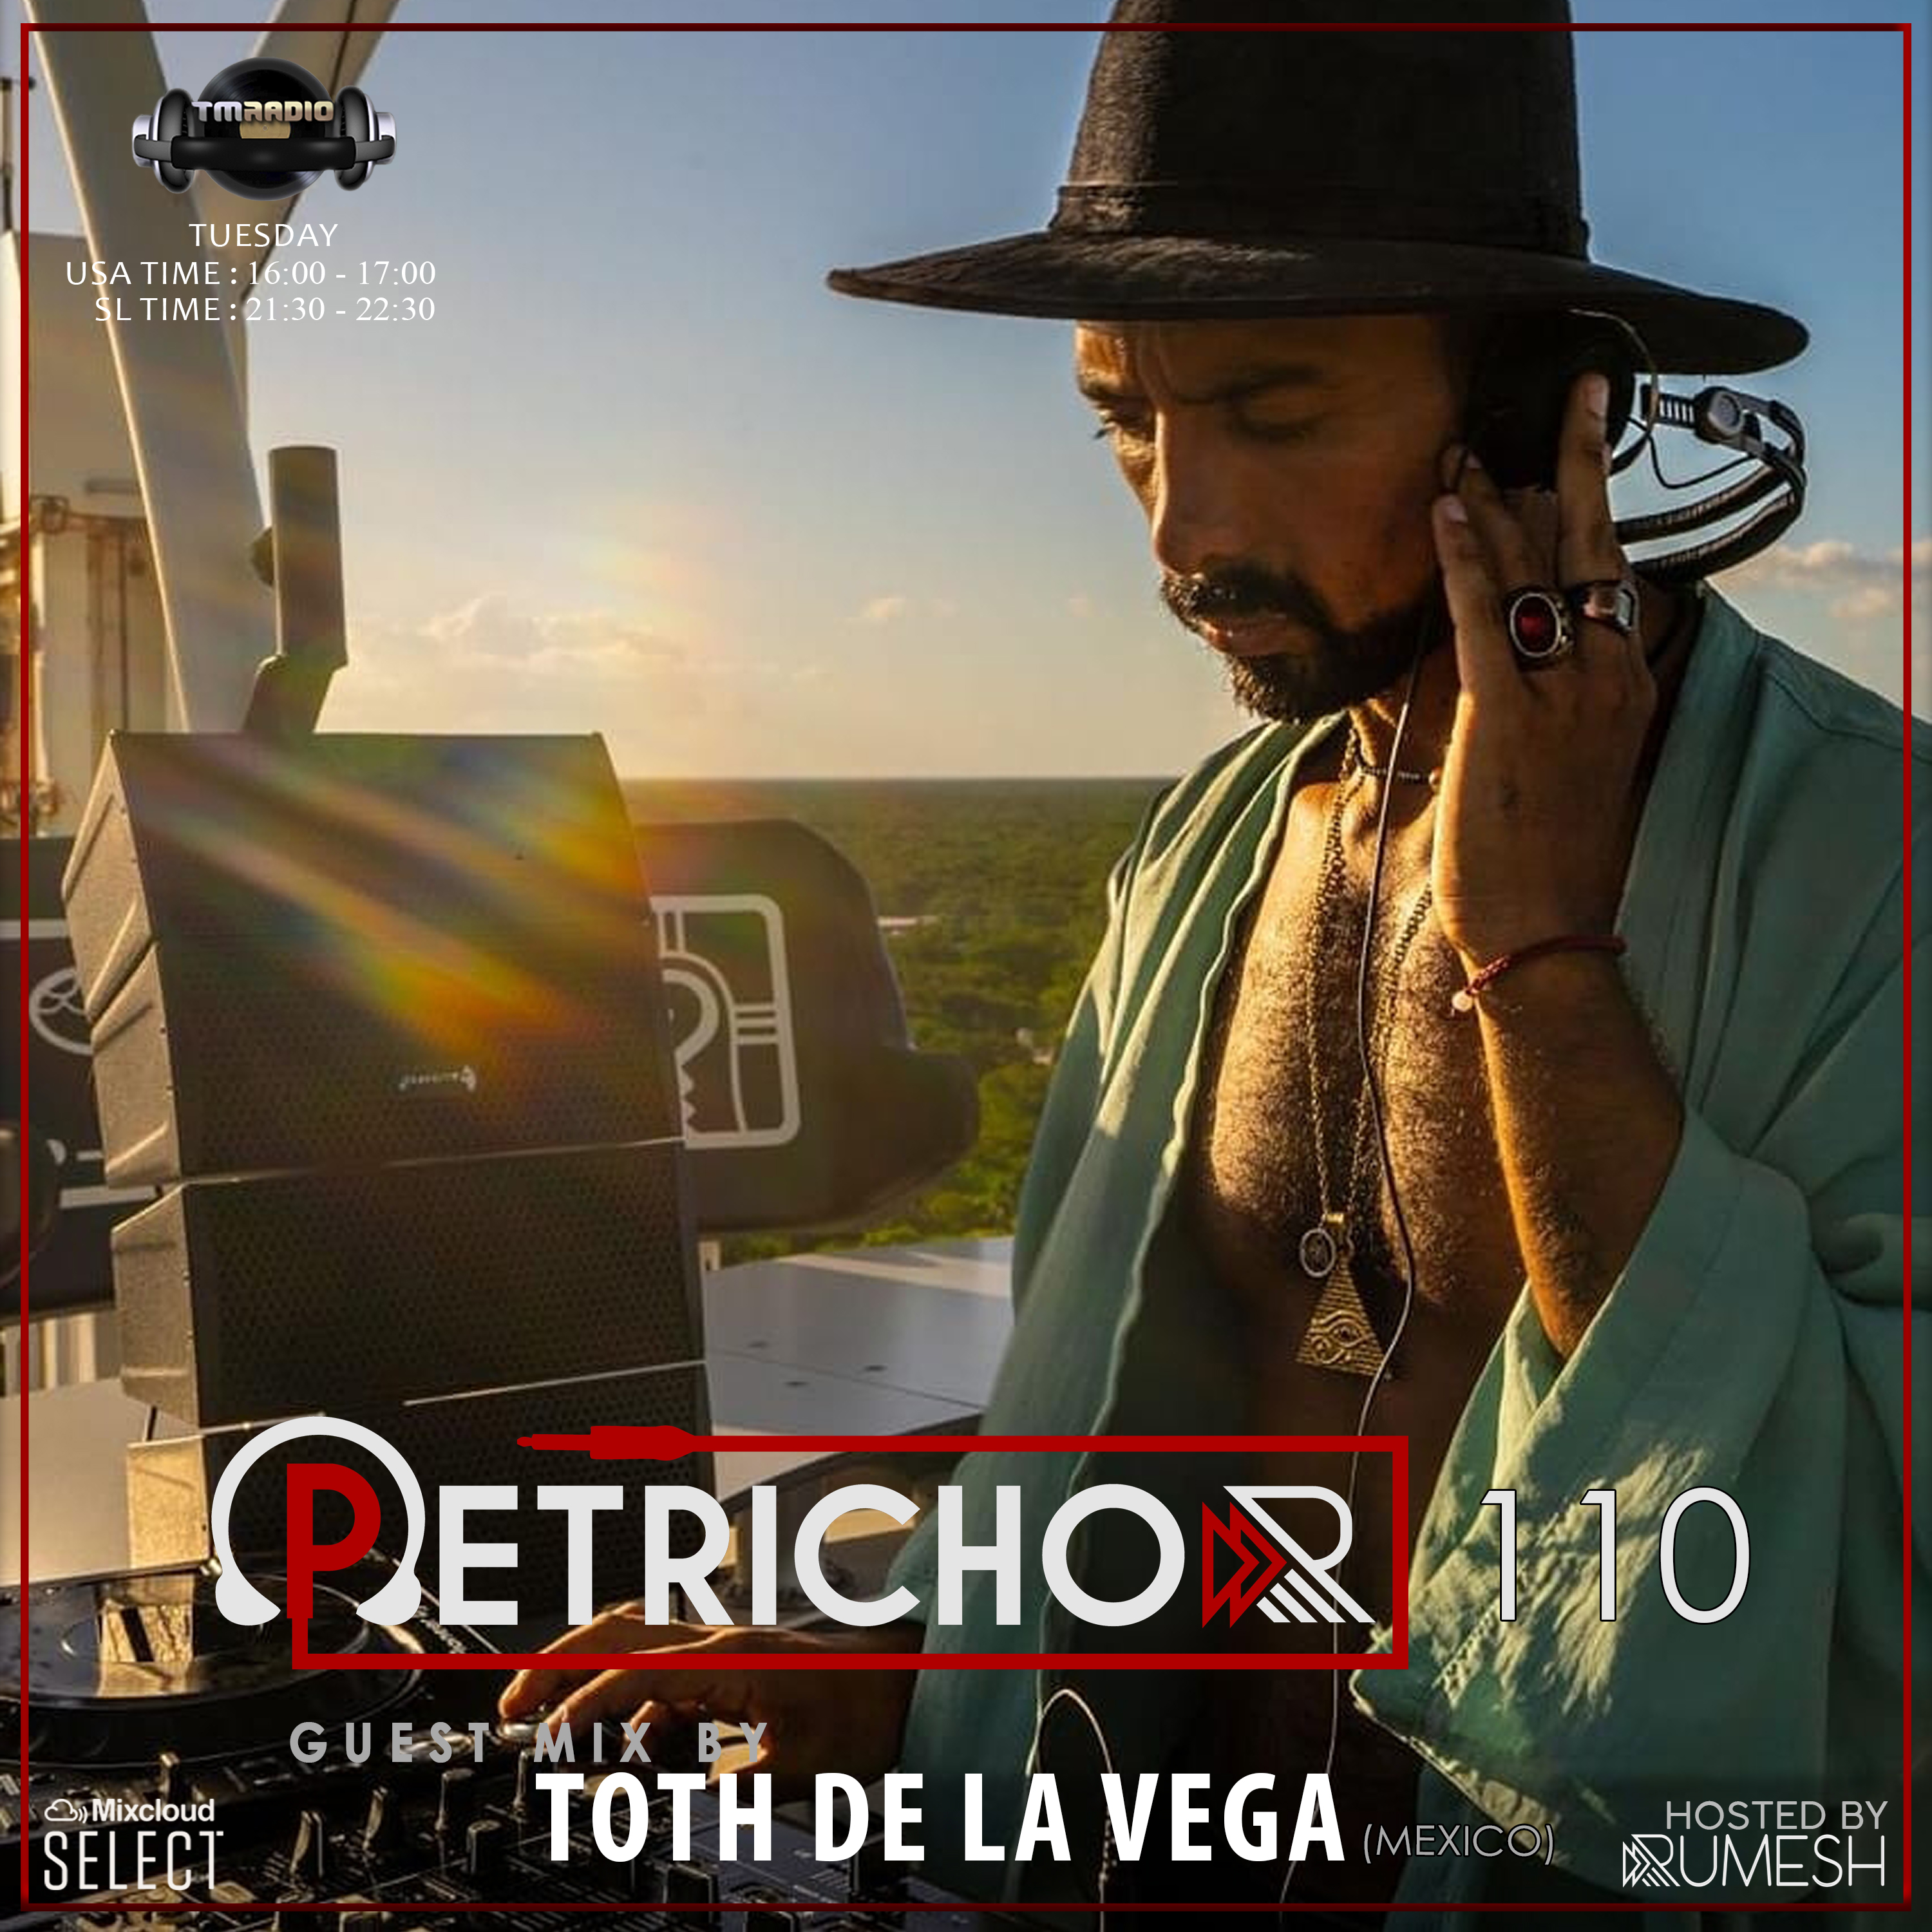 Petrichor 110 Guest Mix by Toth De la Vega -(Mexico) (from August 2nd, 2022)